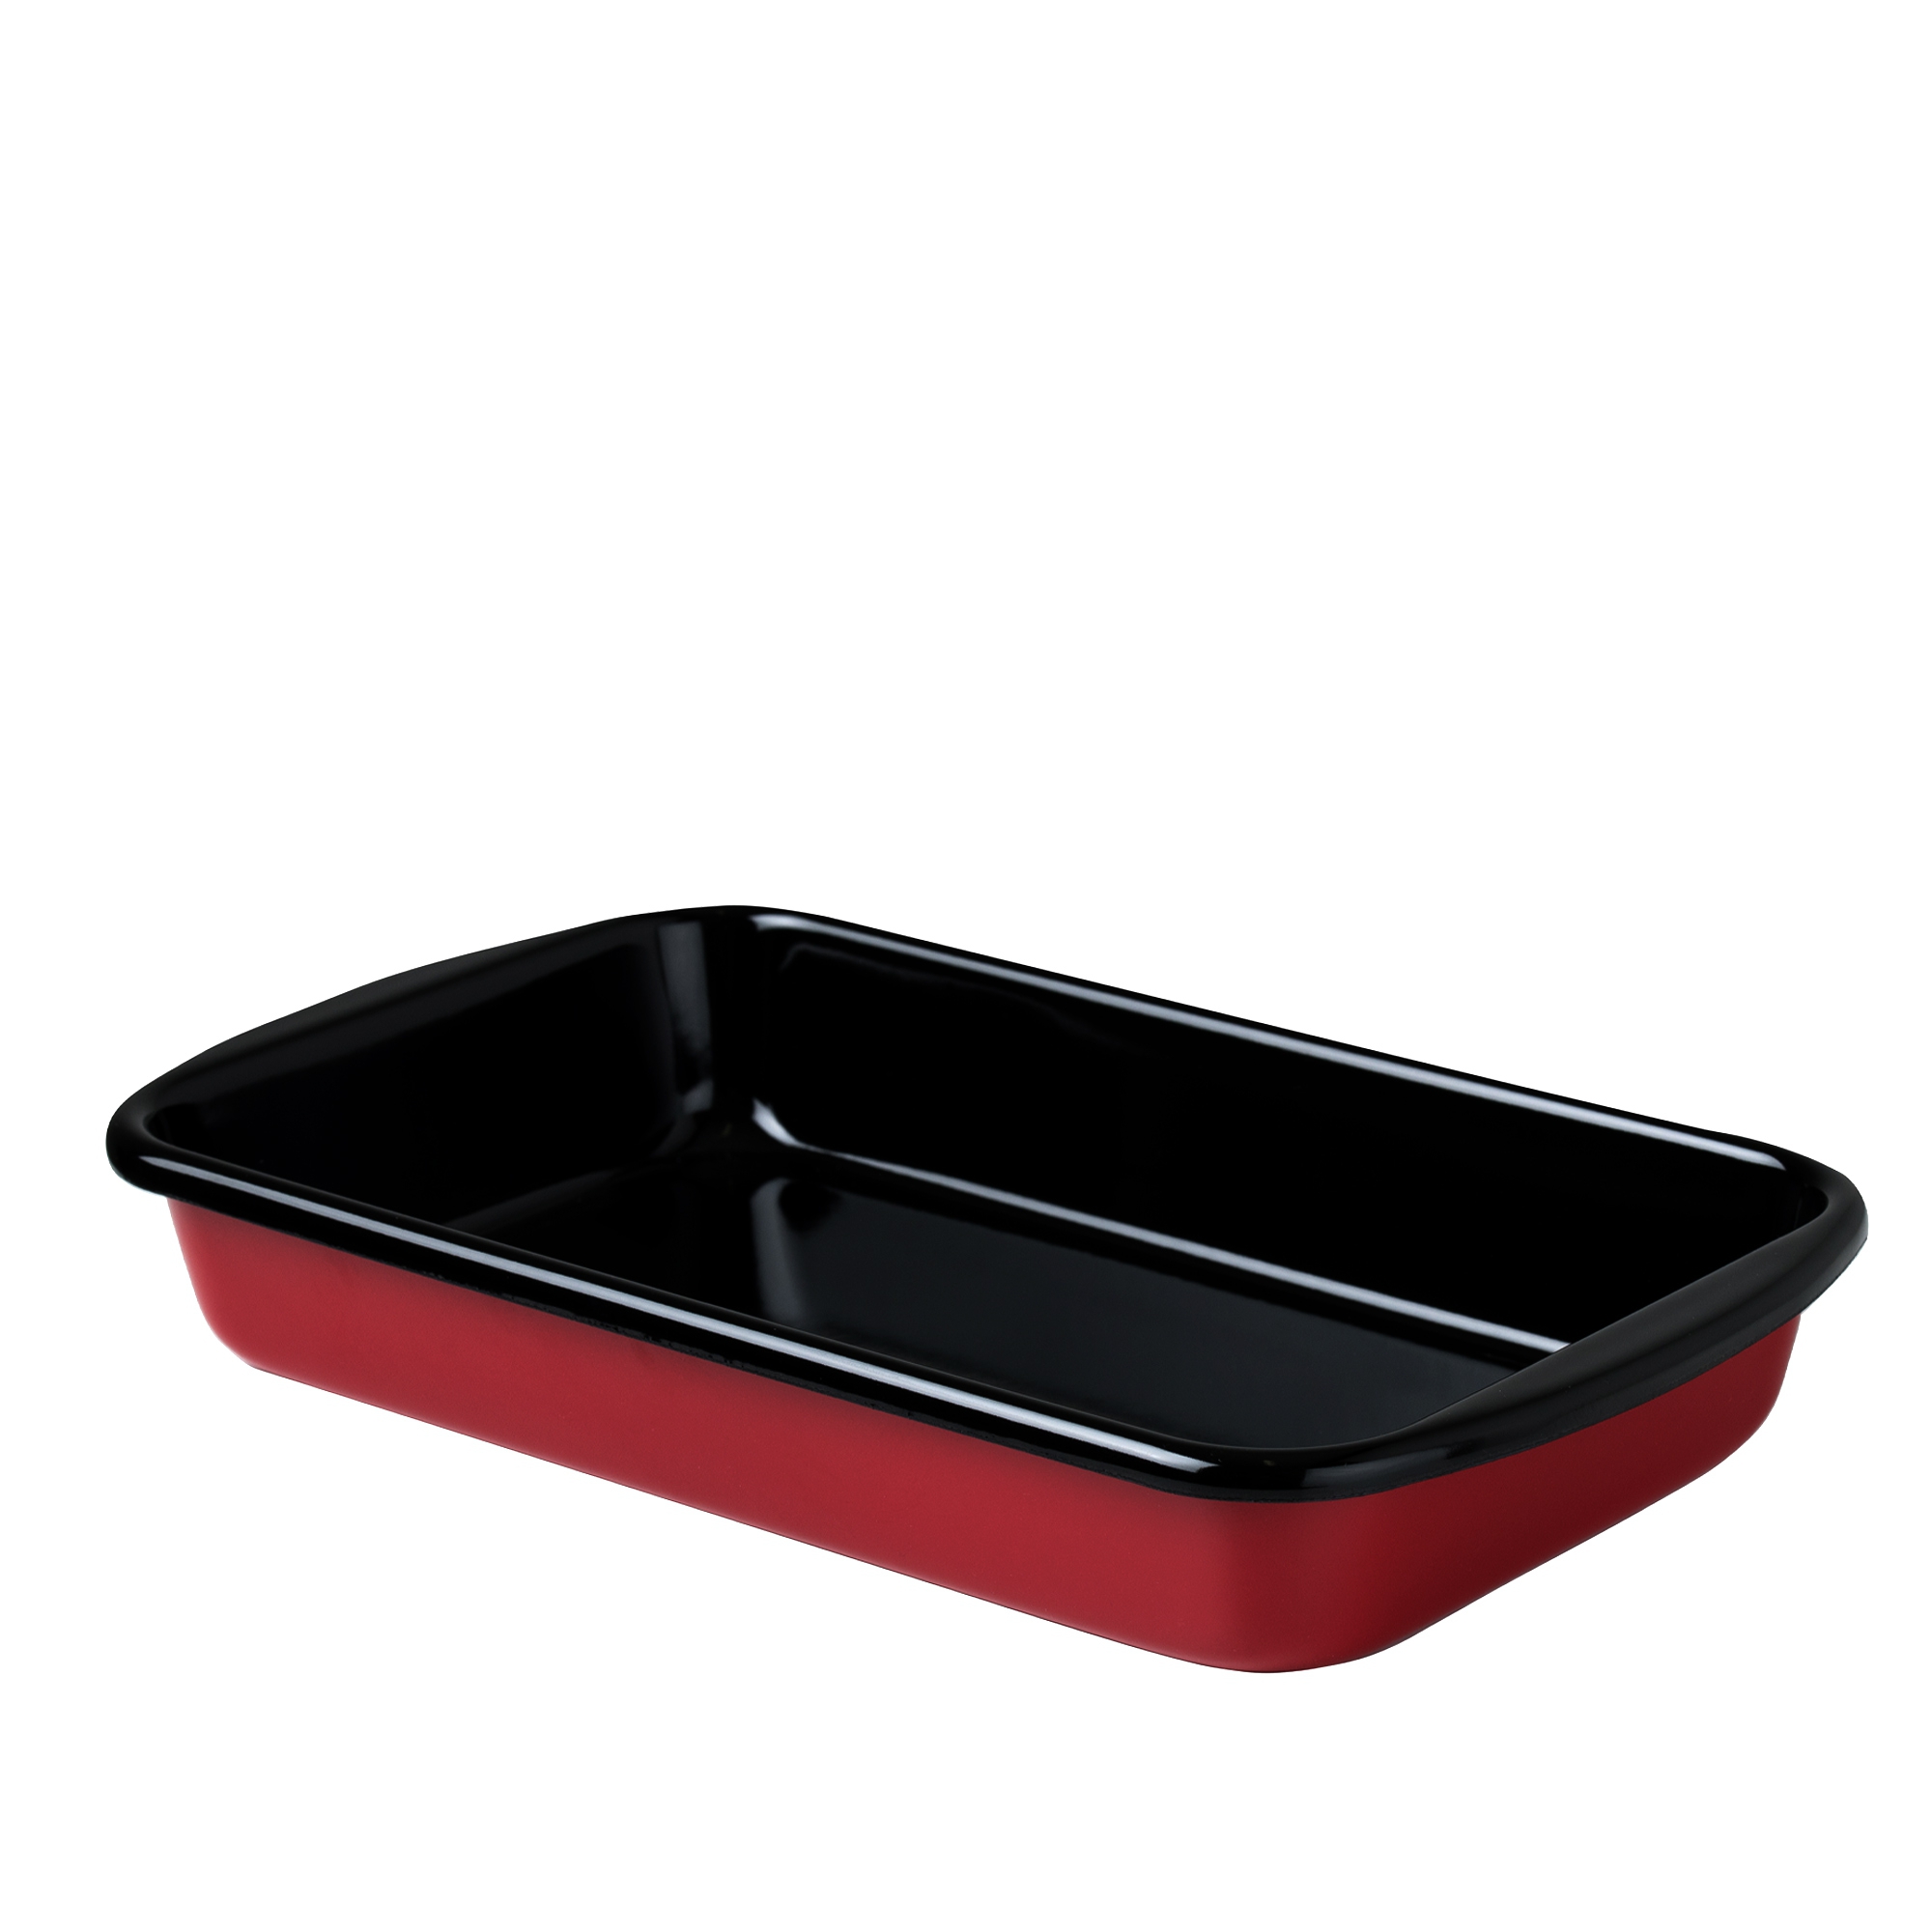 Riess CLASSIC - Color Red - casserole dish 38.0 x 22.5 cm